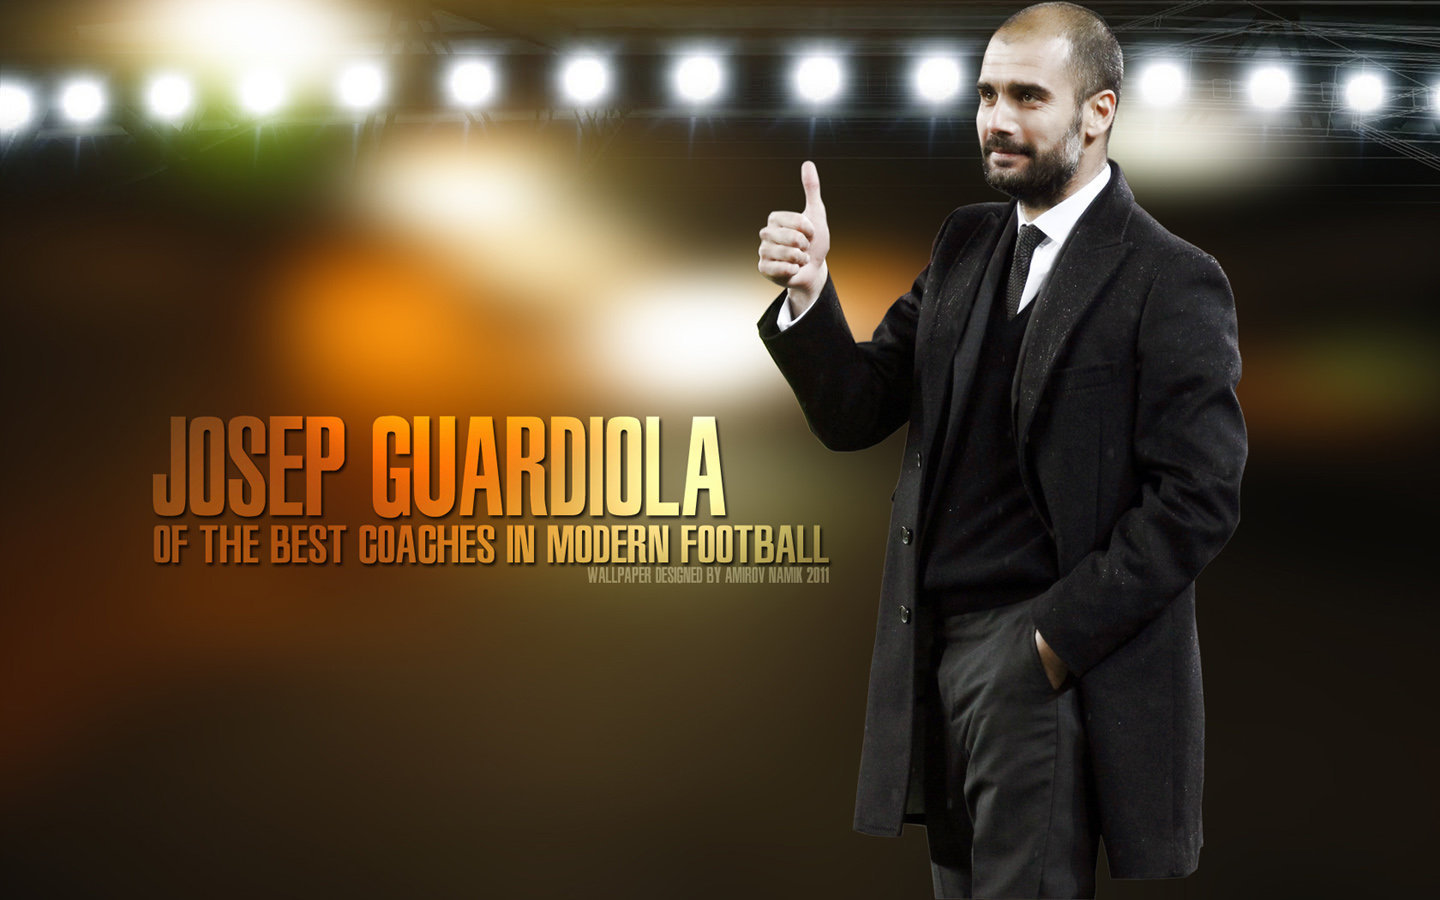 THE STARS OF SPORTS PLAYERS: Pep Guardiola Wallpaper and Info